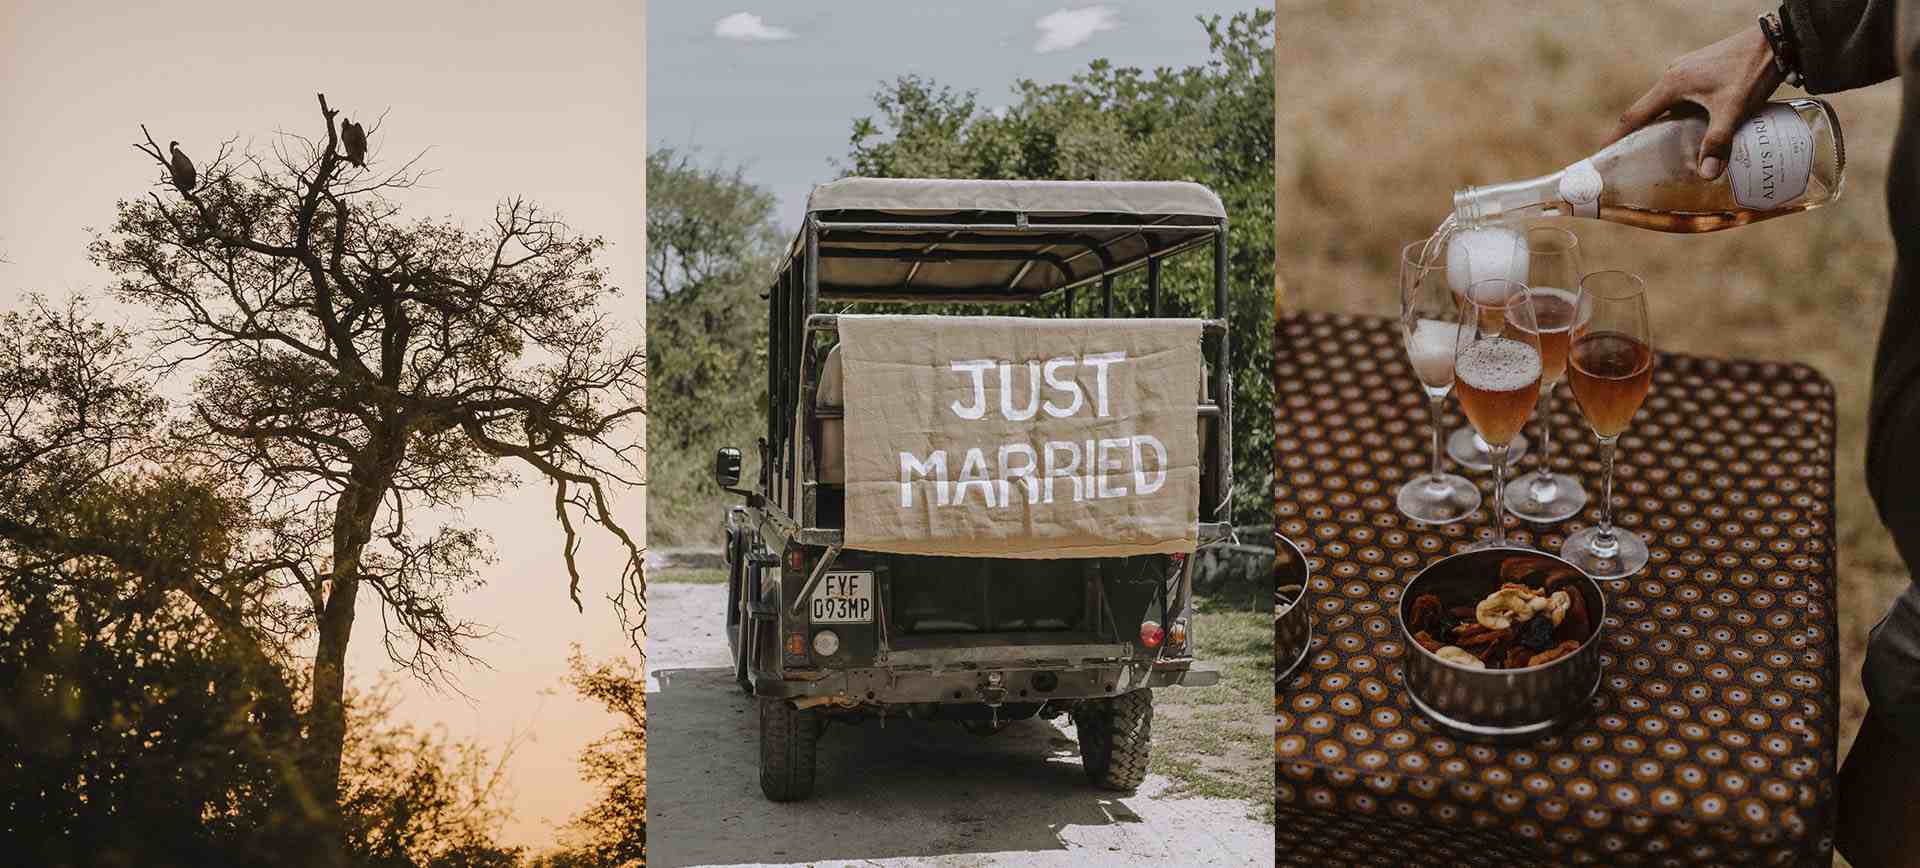 all inclusive safari wedding and honeymoon package in south africa